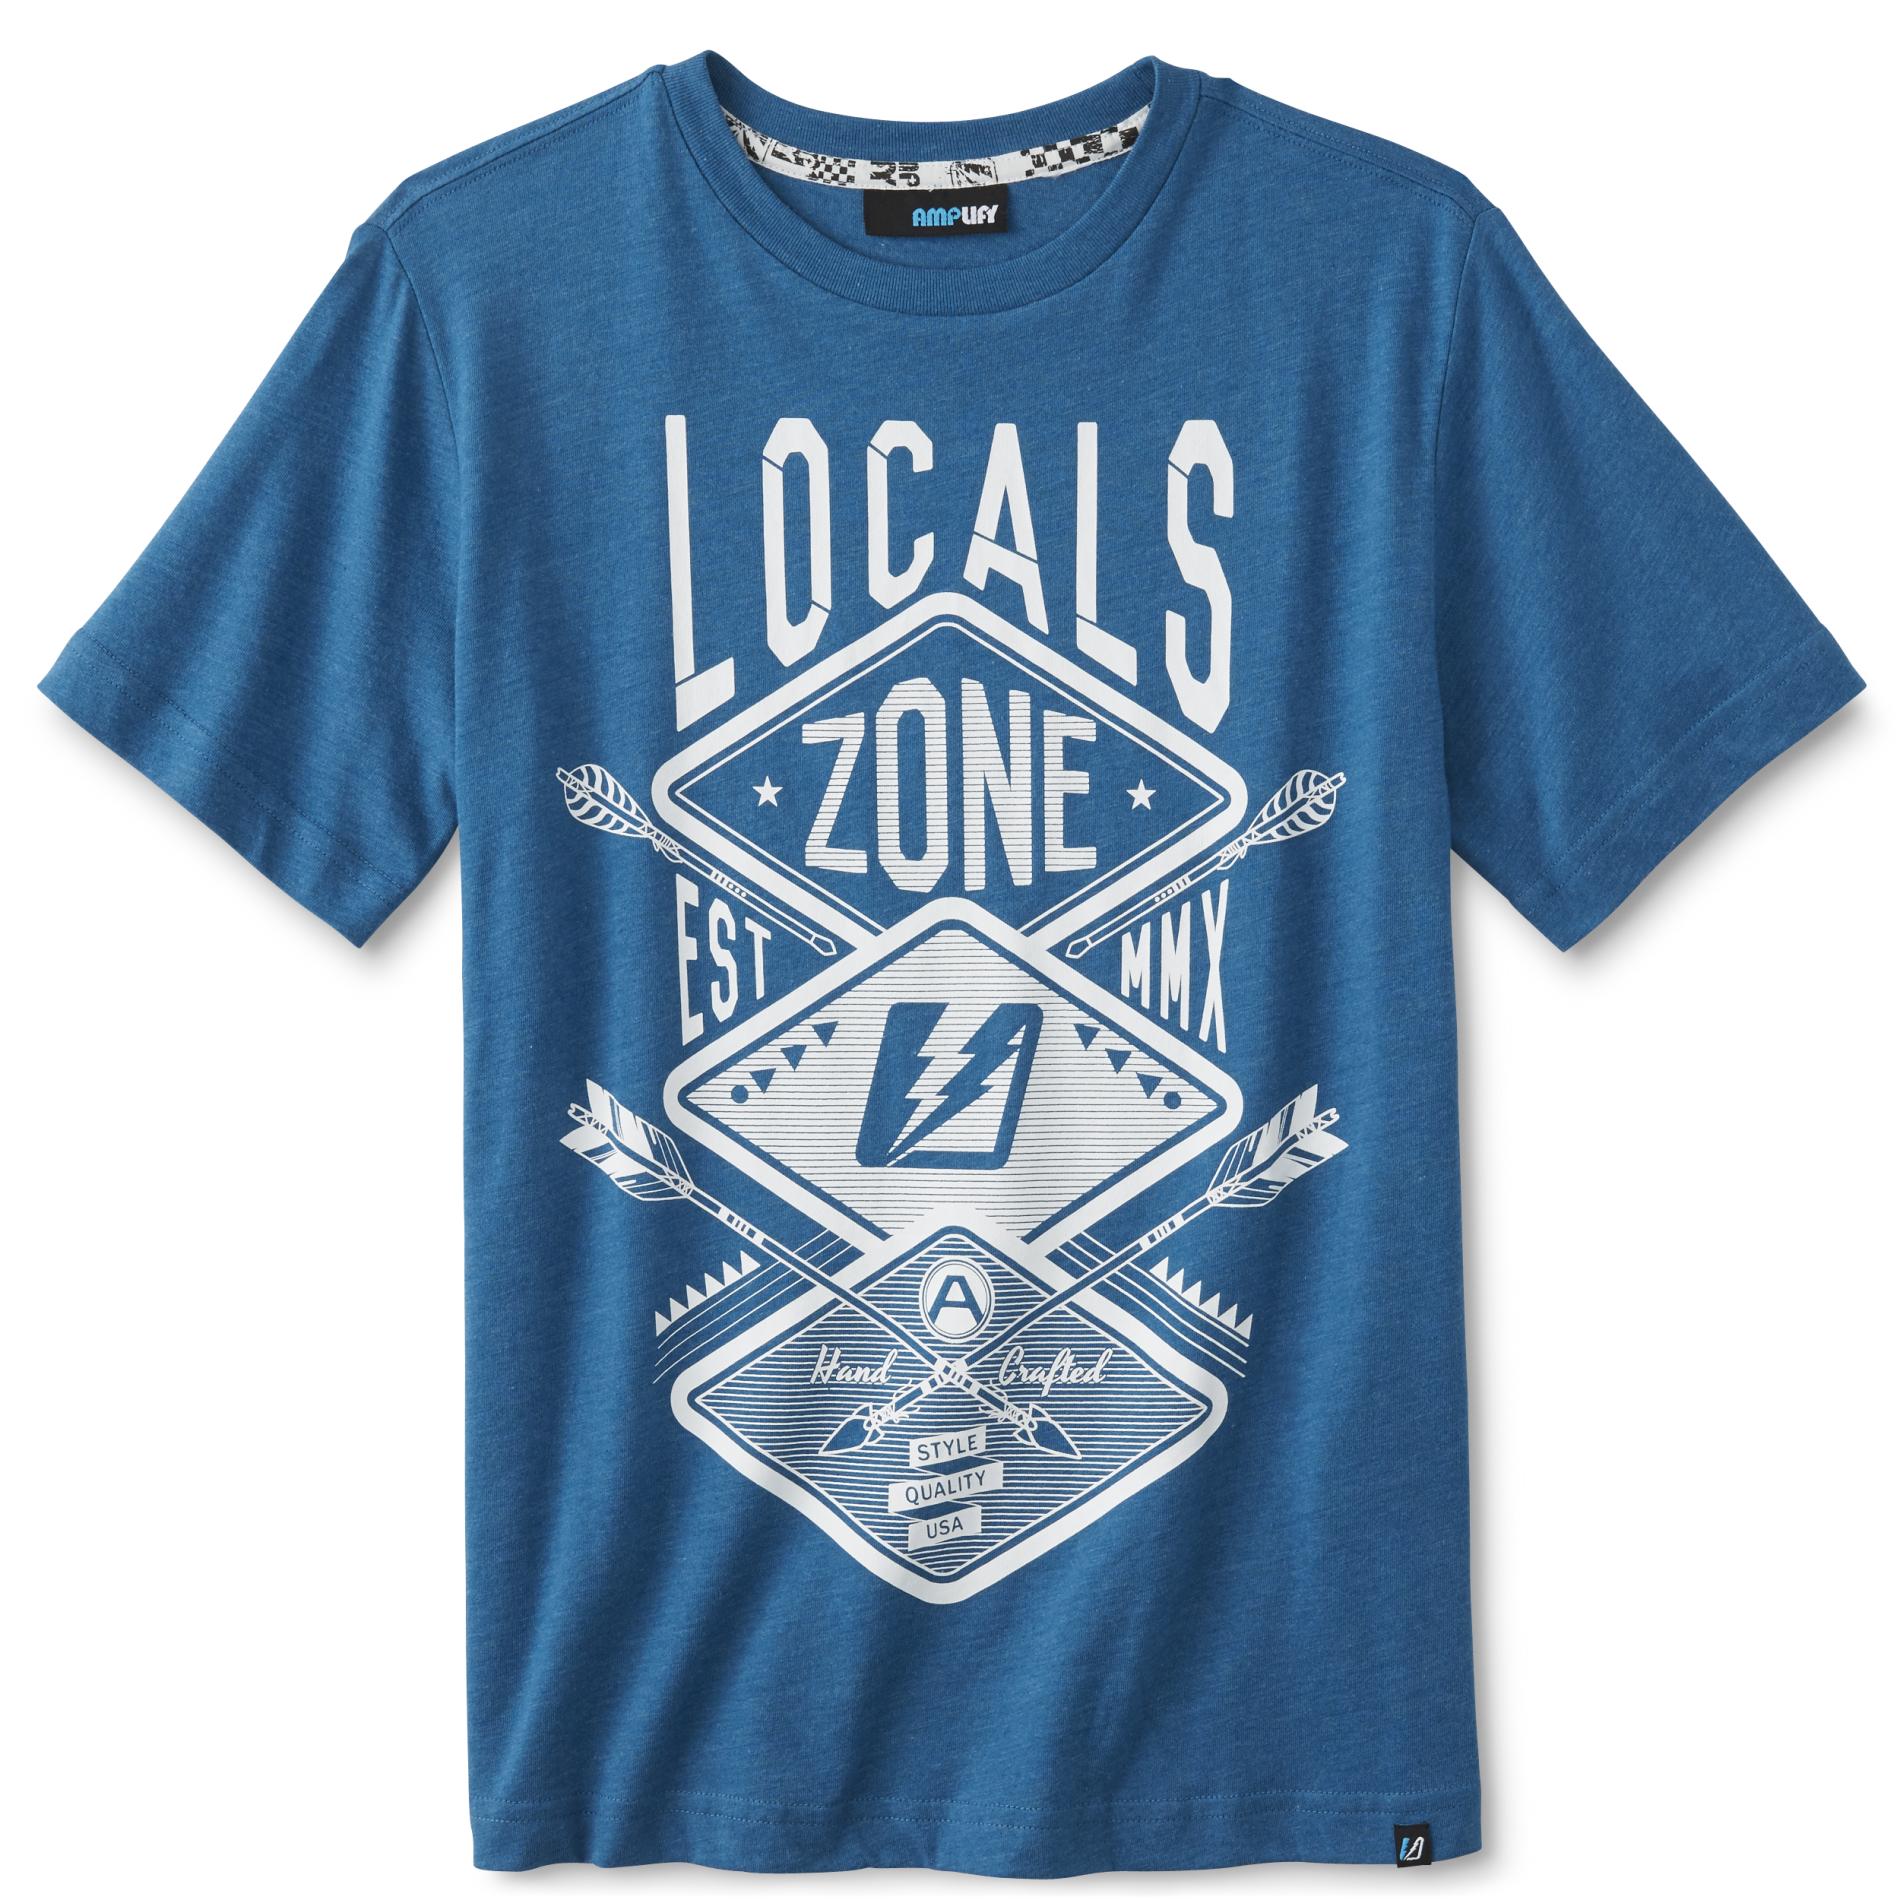 Amplify Boys' Graphic T-Shirt - Locals